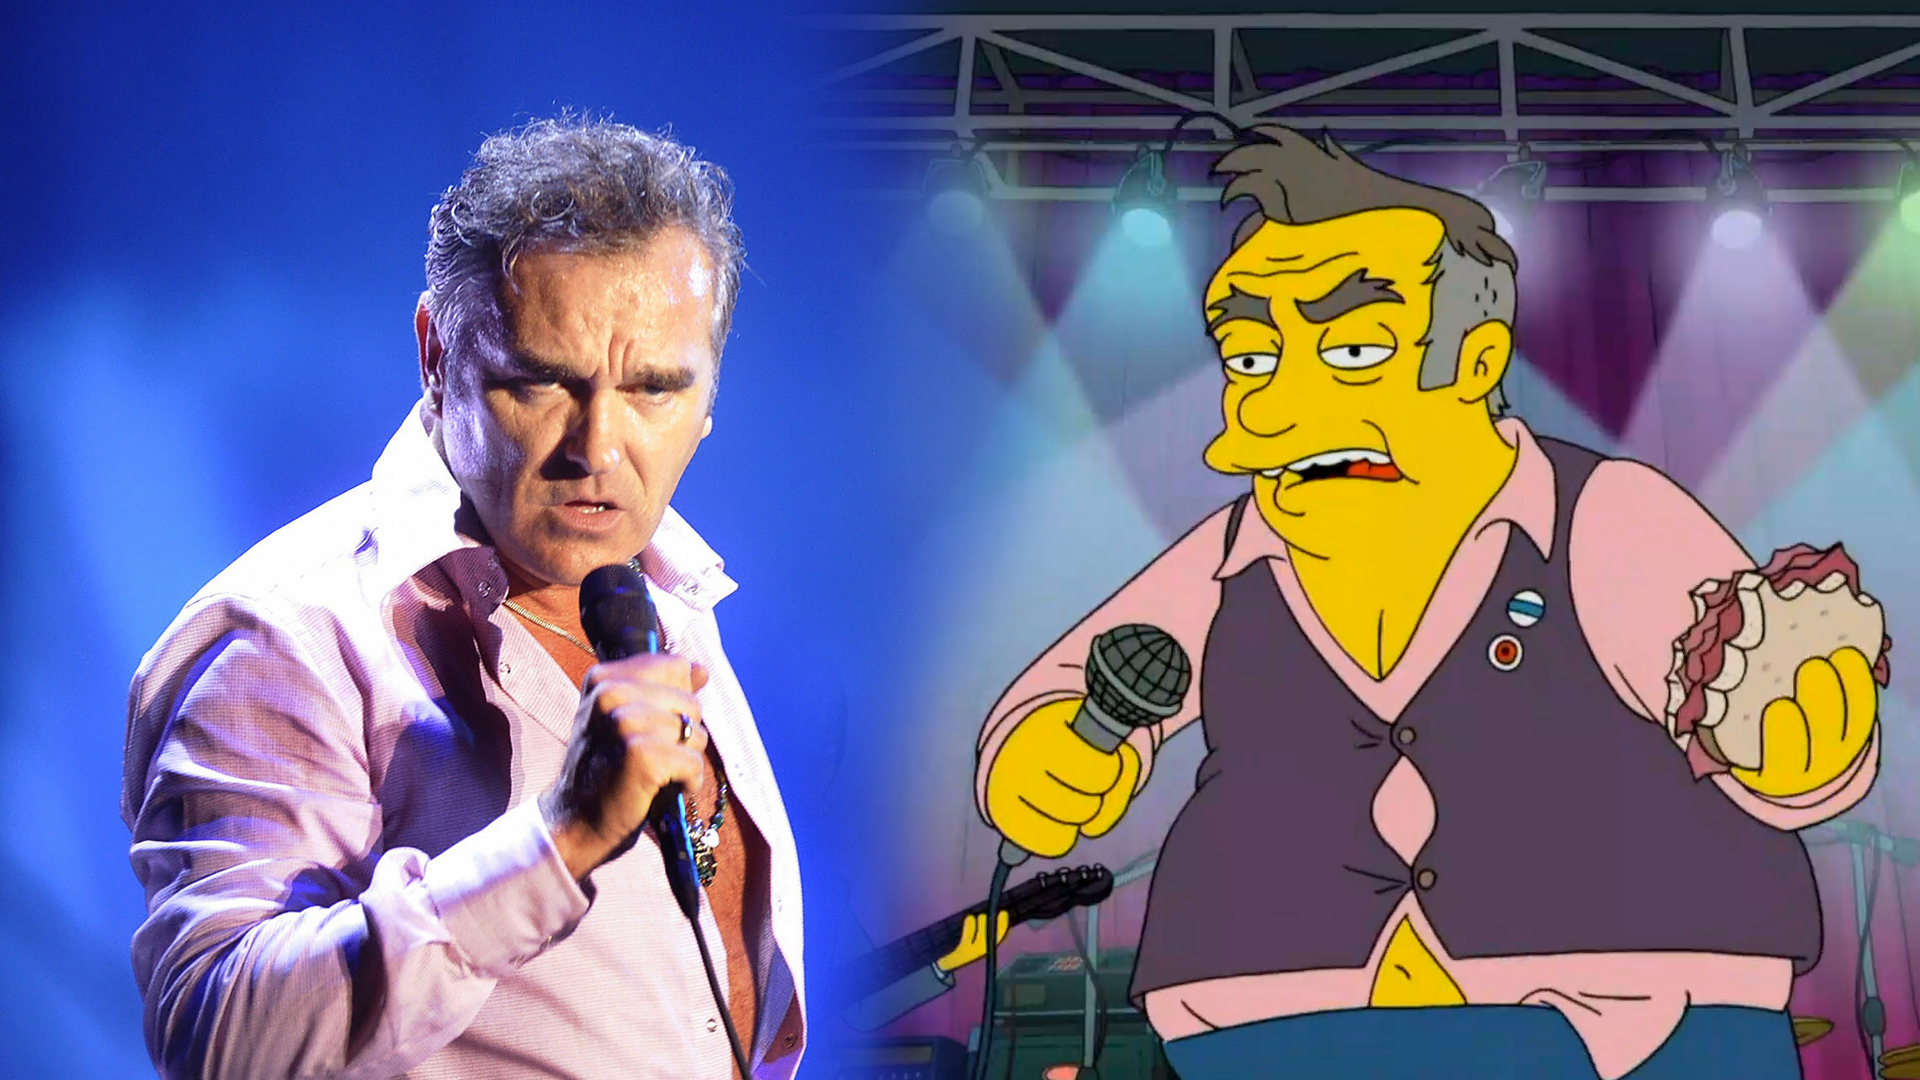 Morrissey explodes ‘The Simpsons’ for ‘hateful’ and ‘hypocritical’ parody